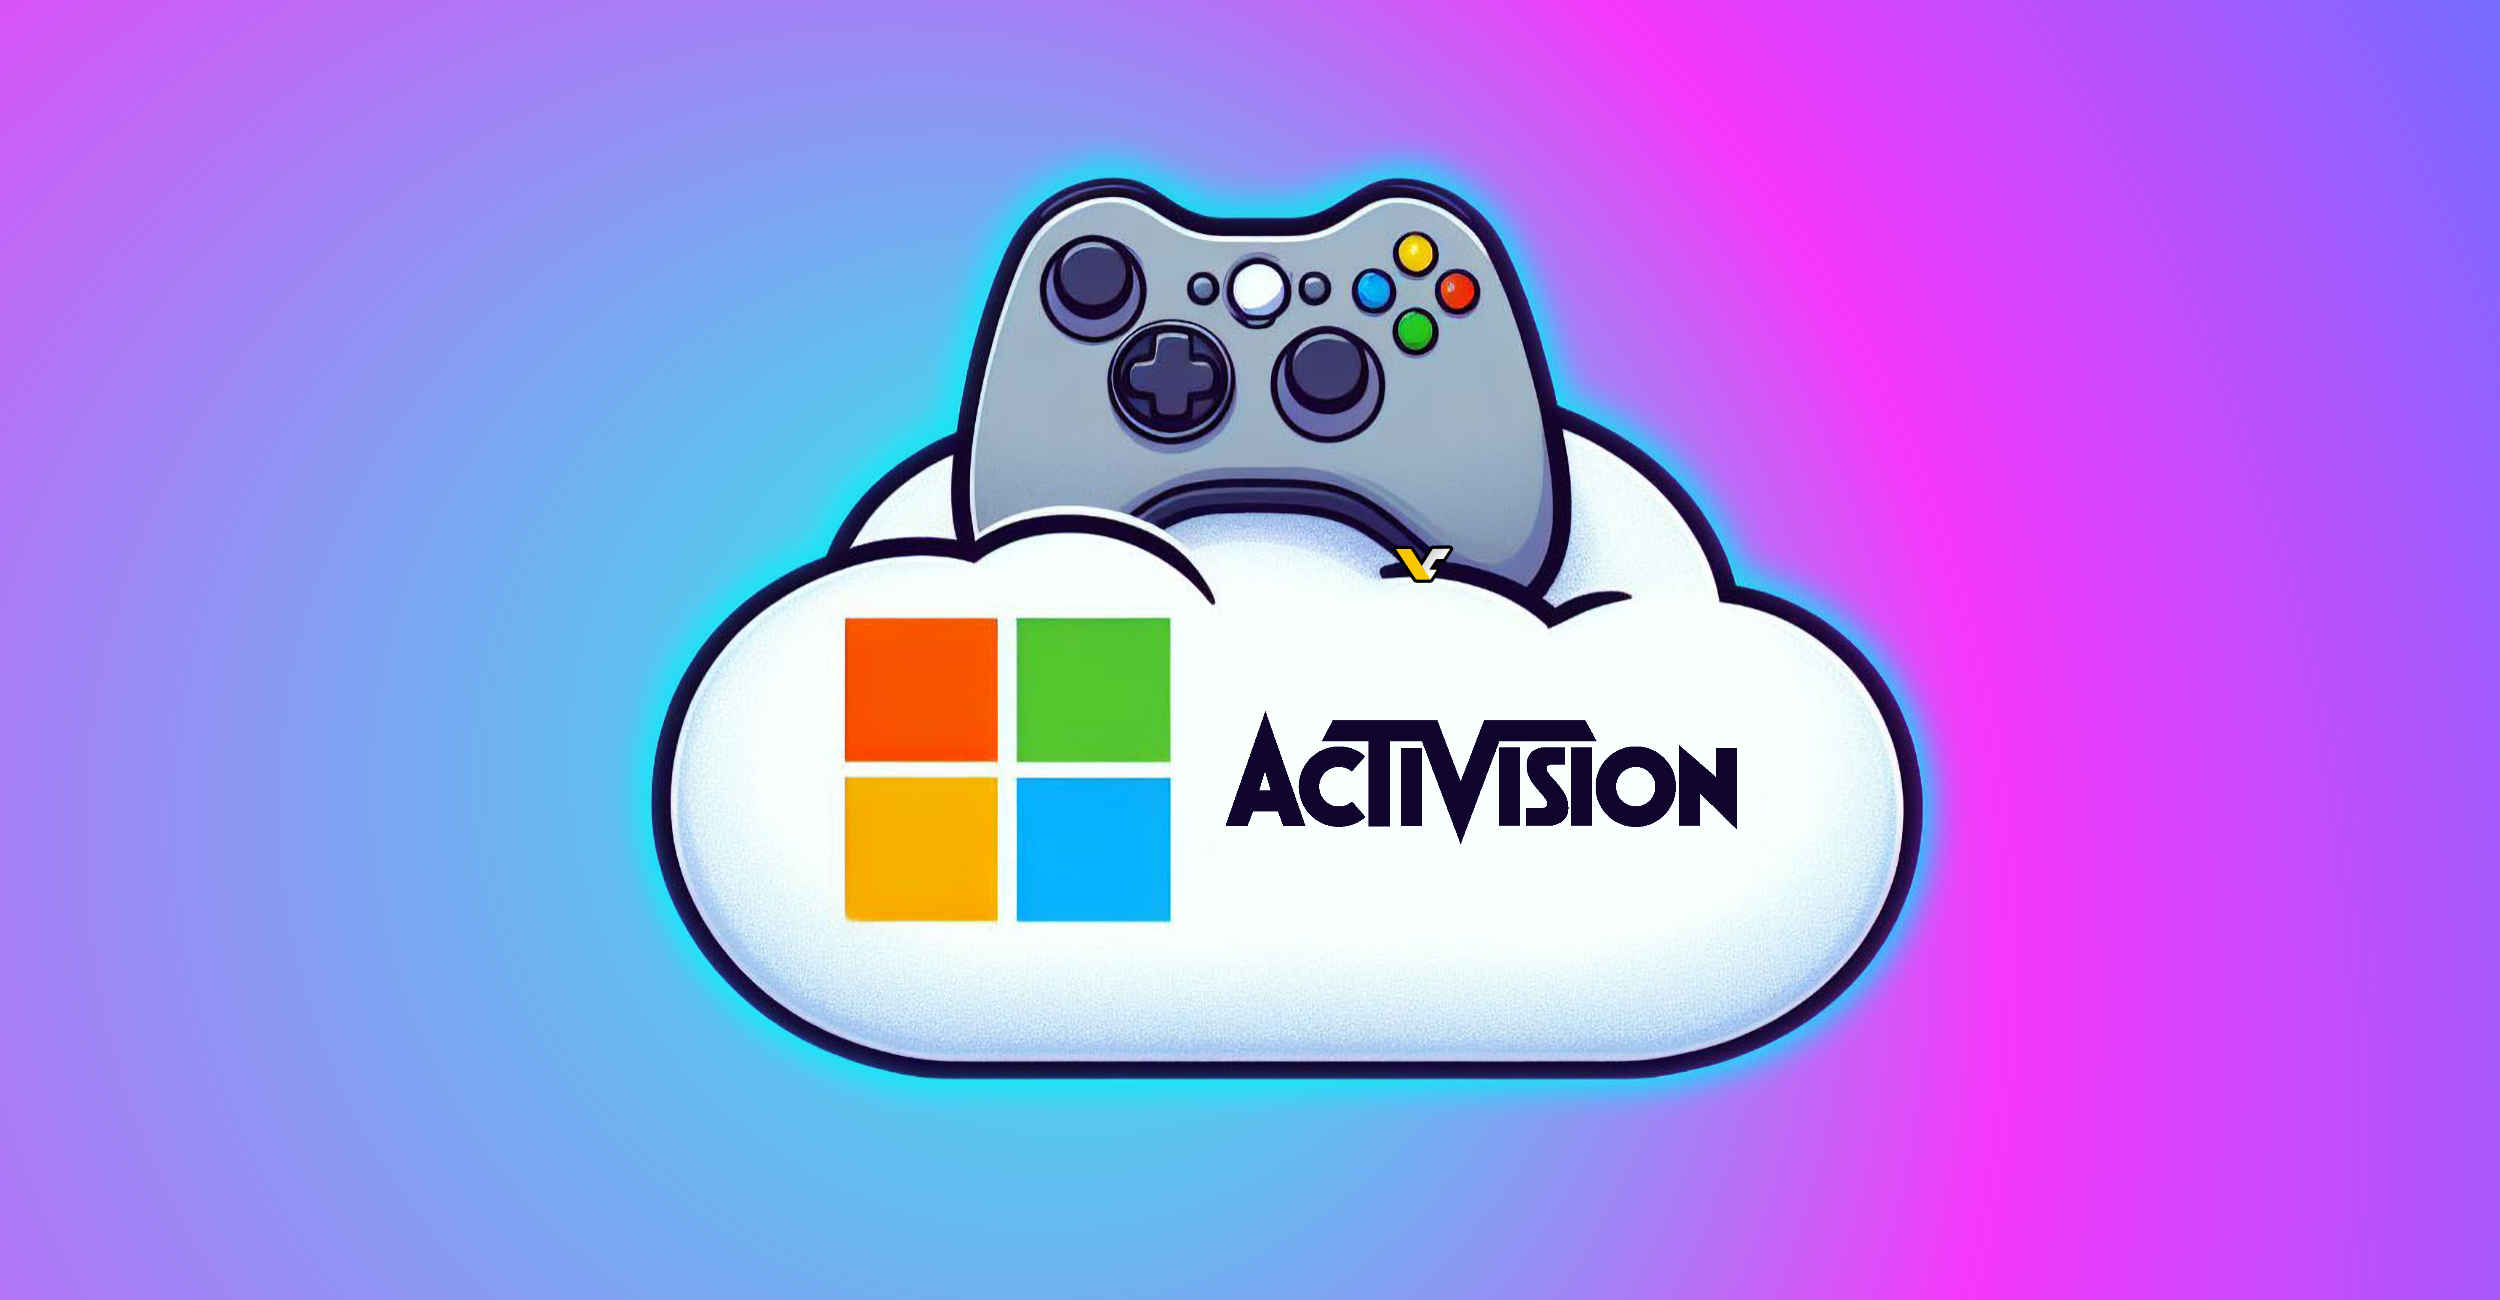 UK regulator clears way for Microsoft's acquisition of Activision